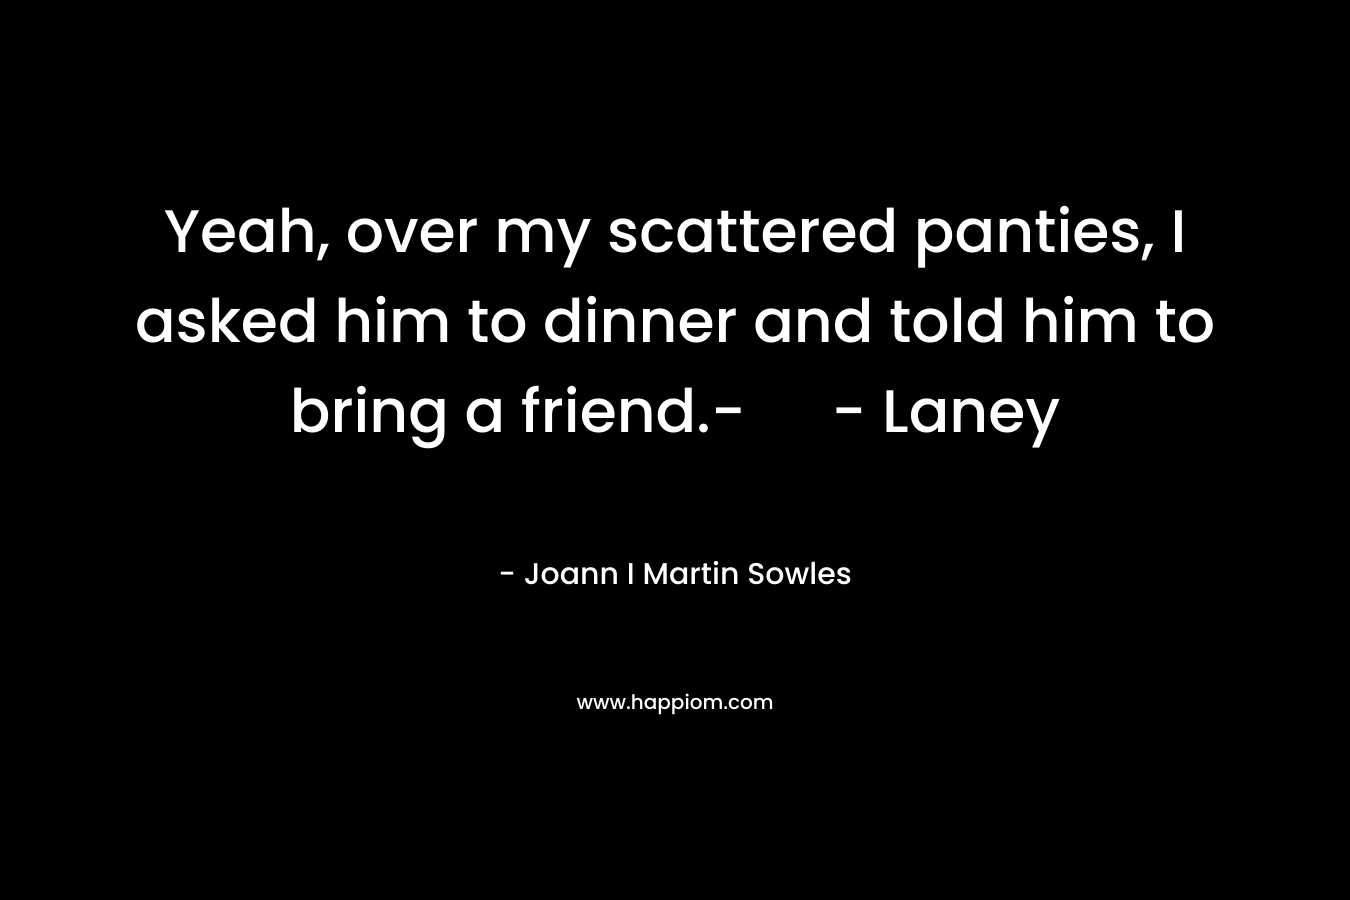 Yeah, over my scattered panties, I asked him to dinner and told him to bring a friend.- - Laney